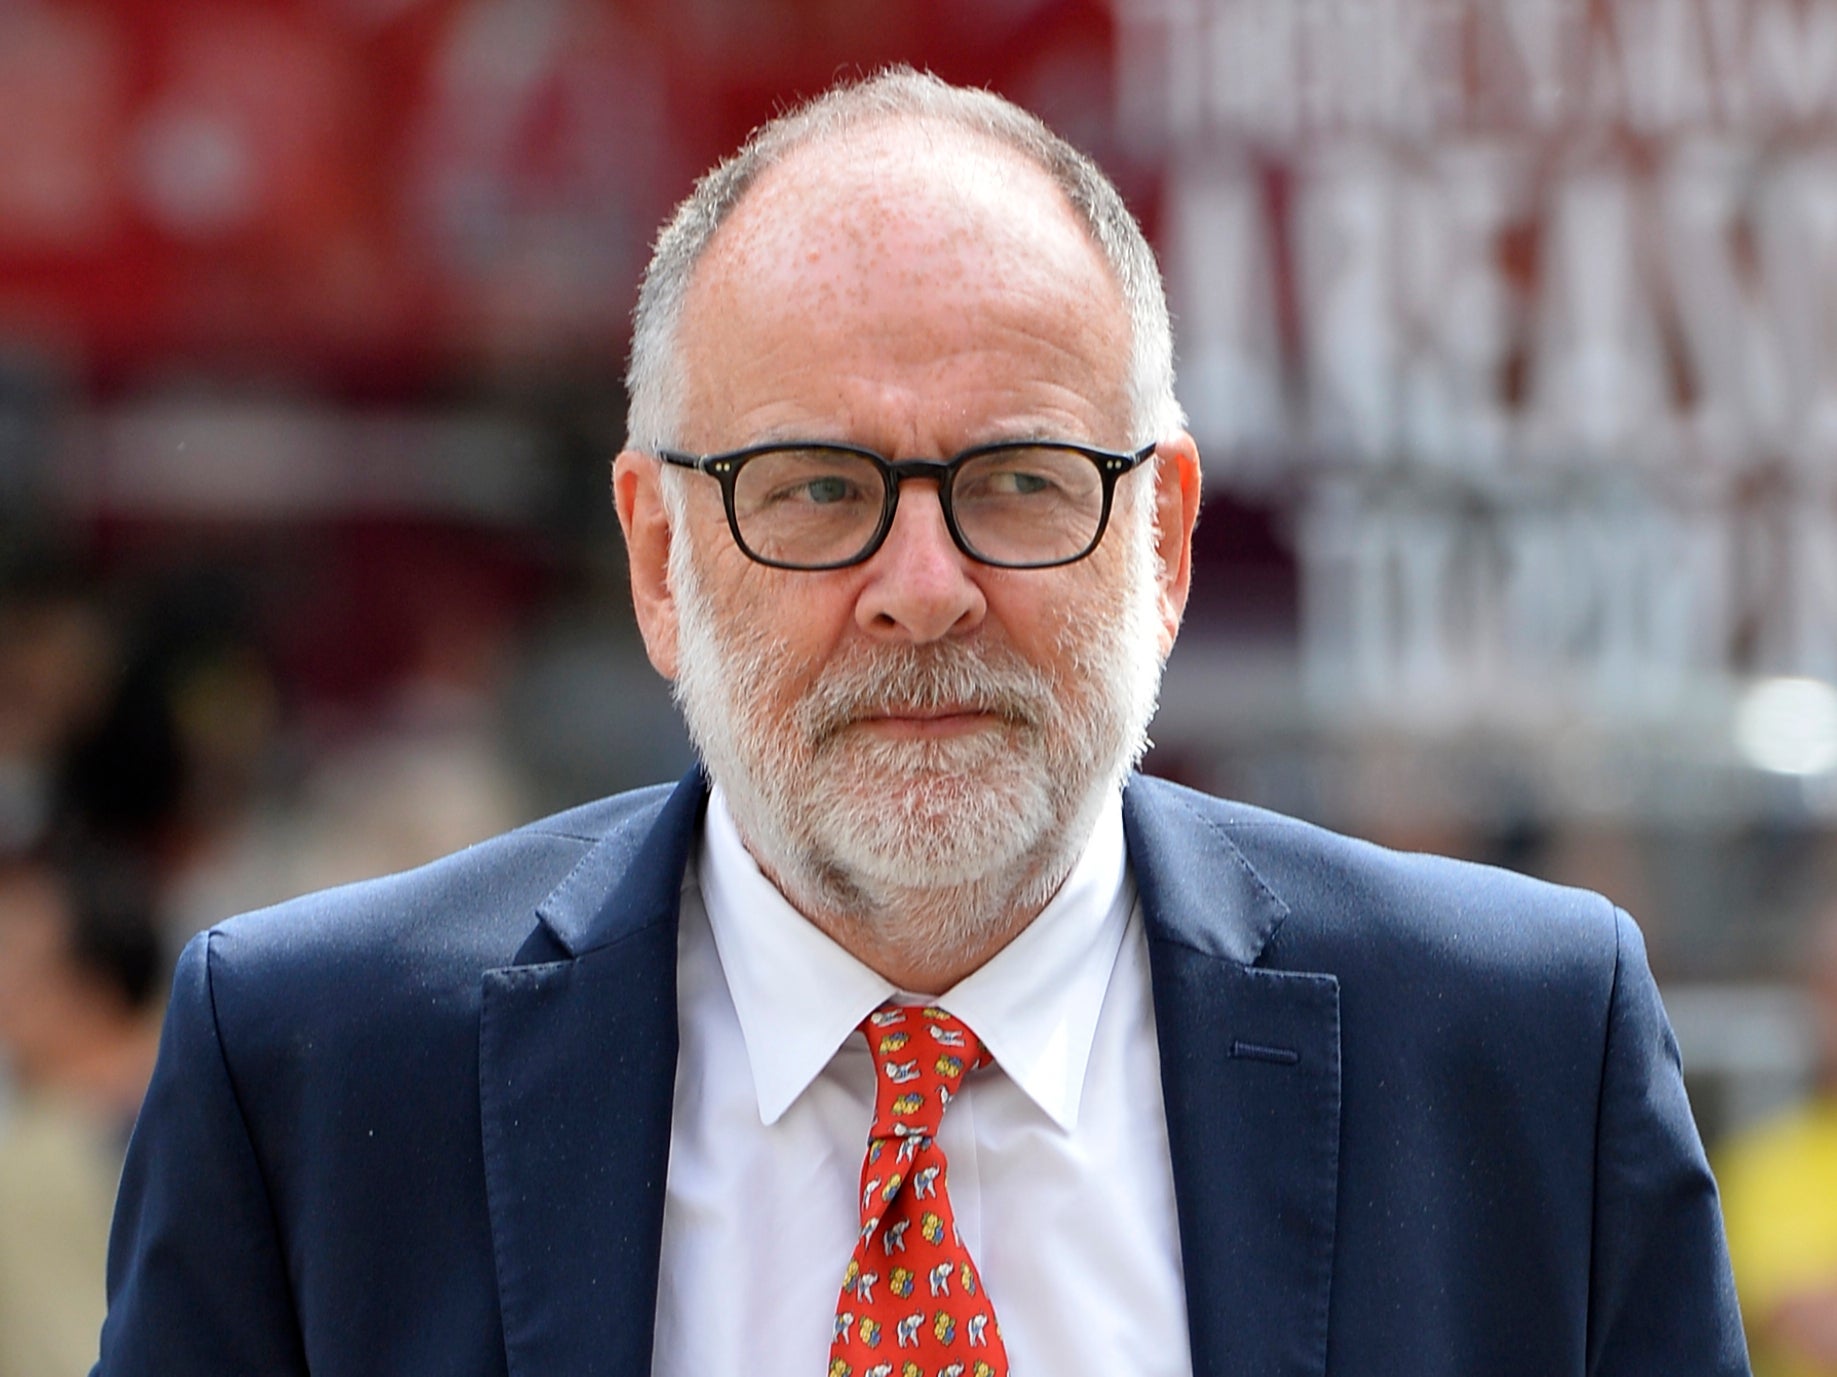 Lord Falconer was appointed shadow attorney general by Keir Starmer in April 2020